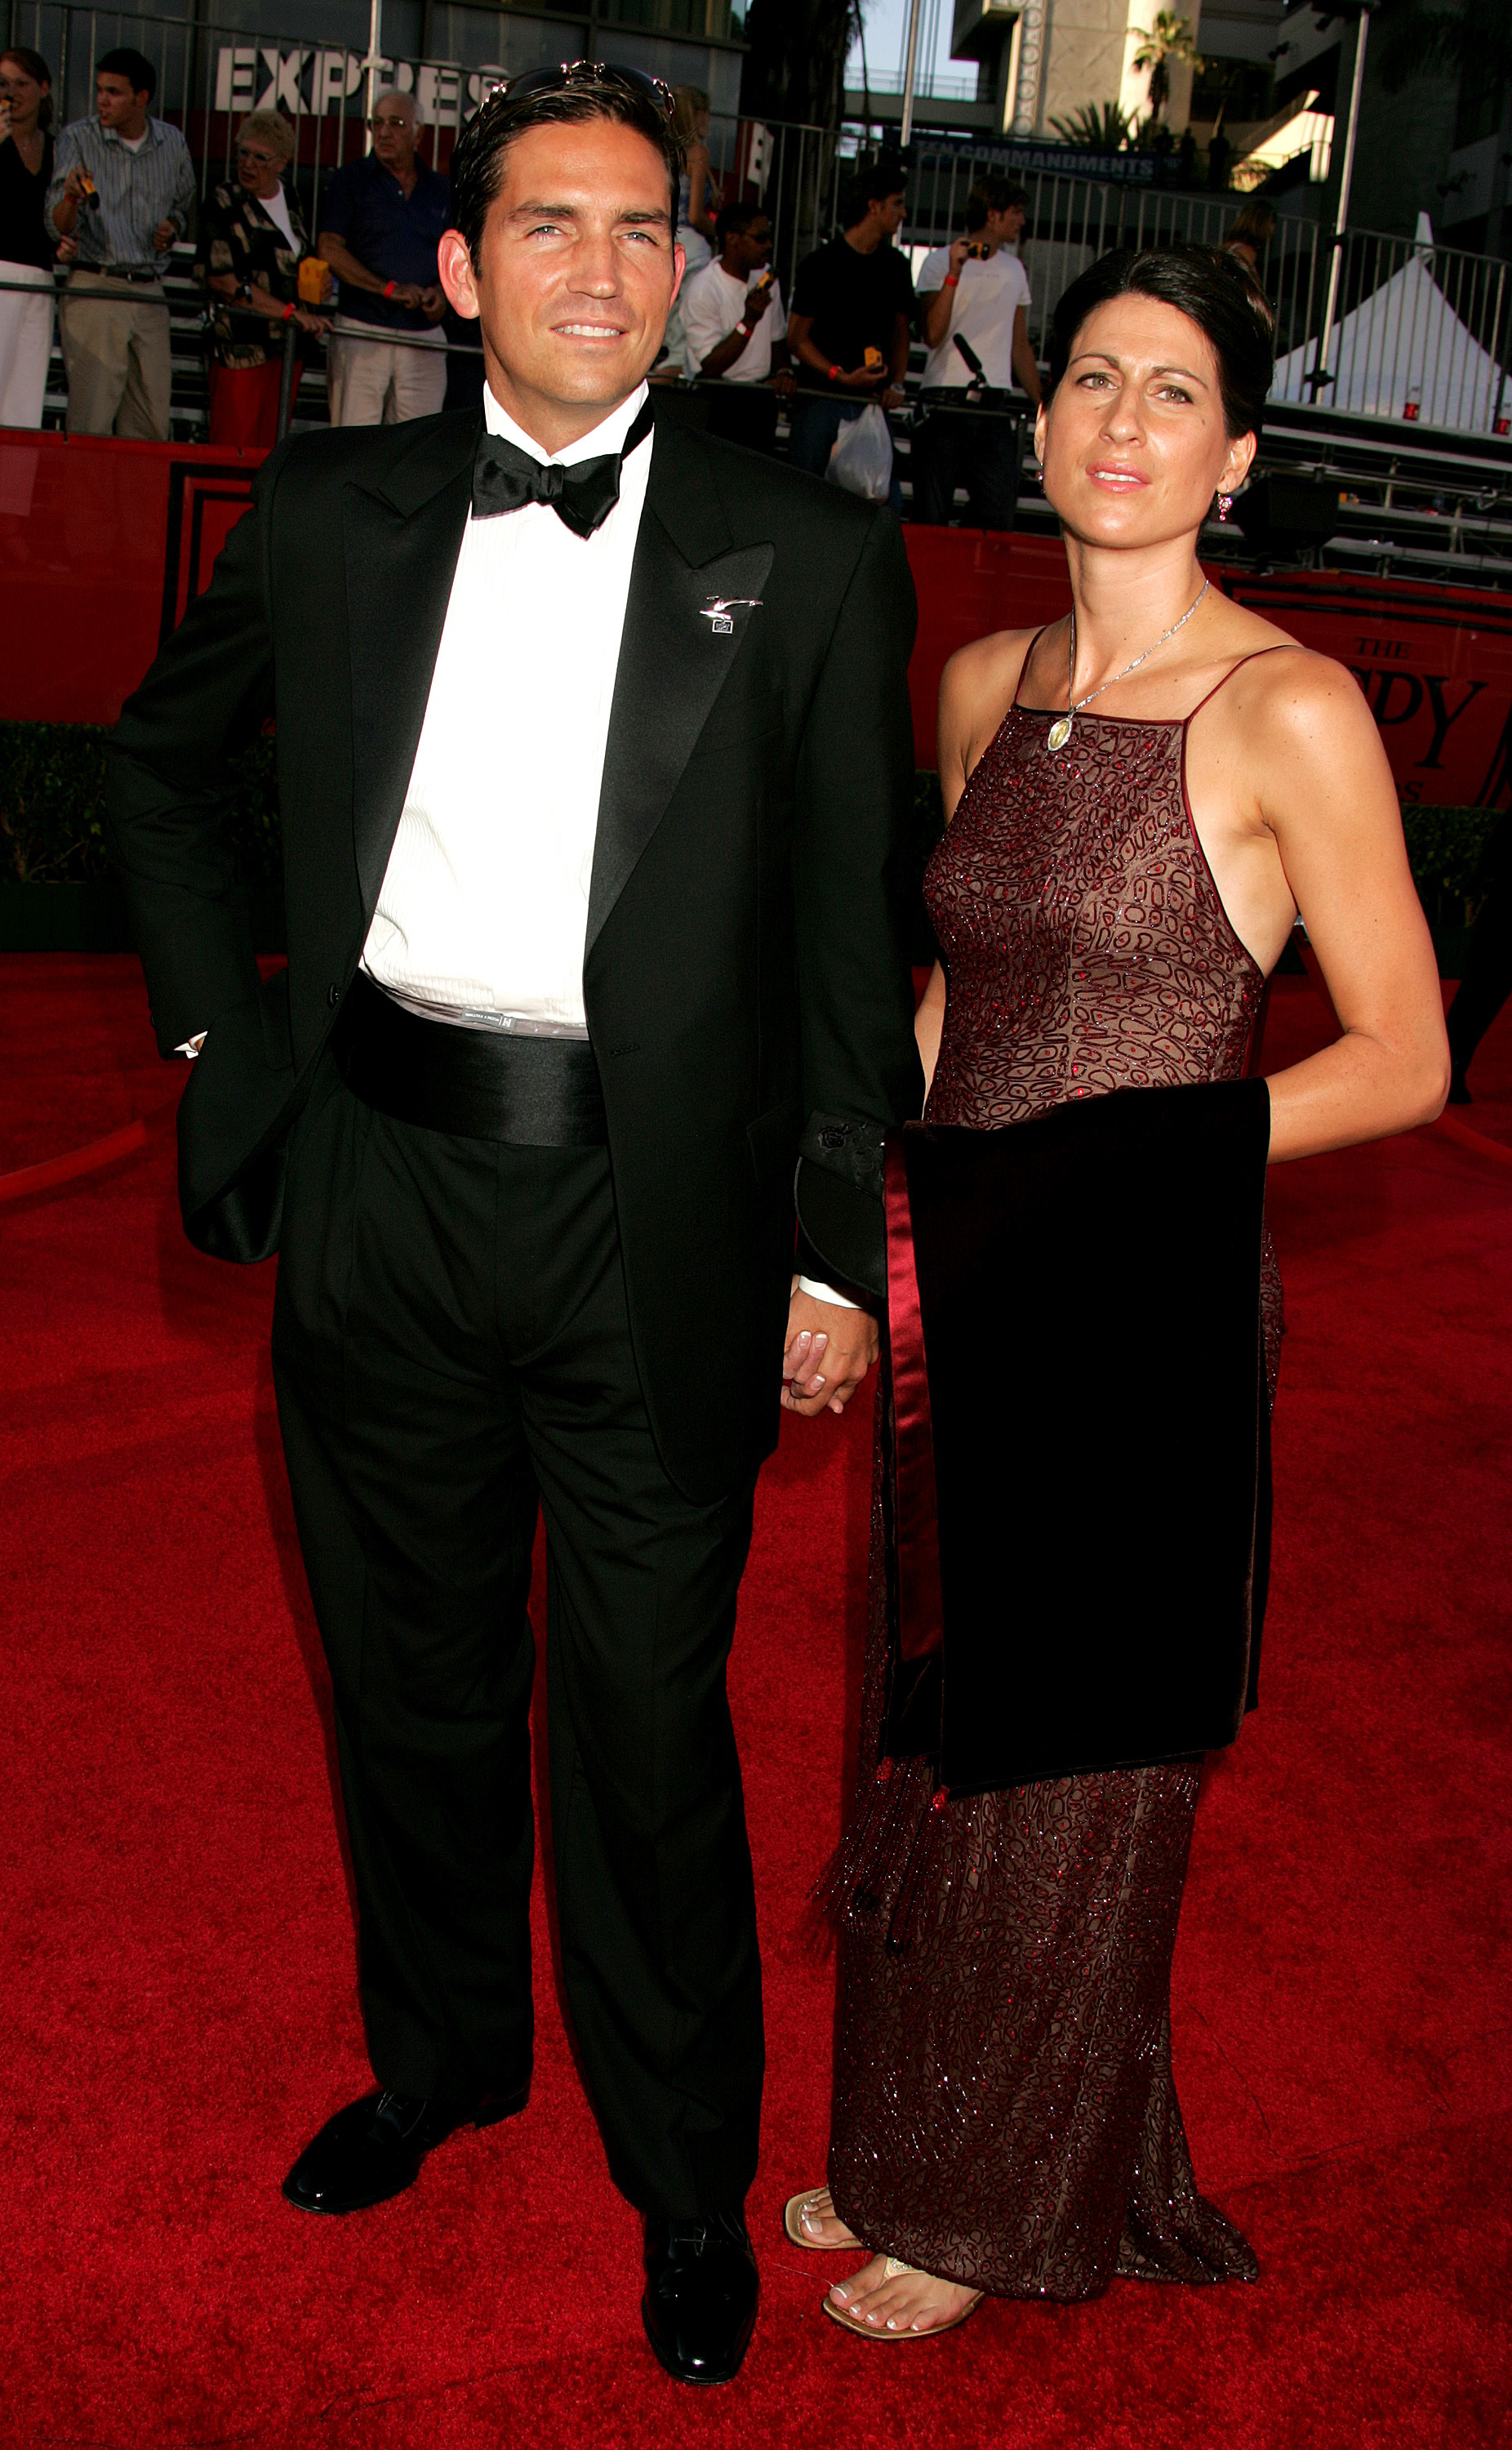 Jim Caviezel and his wife Kerri Browitt Caviezel attend the 2004 ESPY Awards at Kodak Theatre in May 2004, in Hollywood, California. | Source: Getty Images